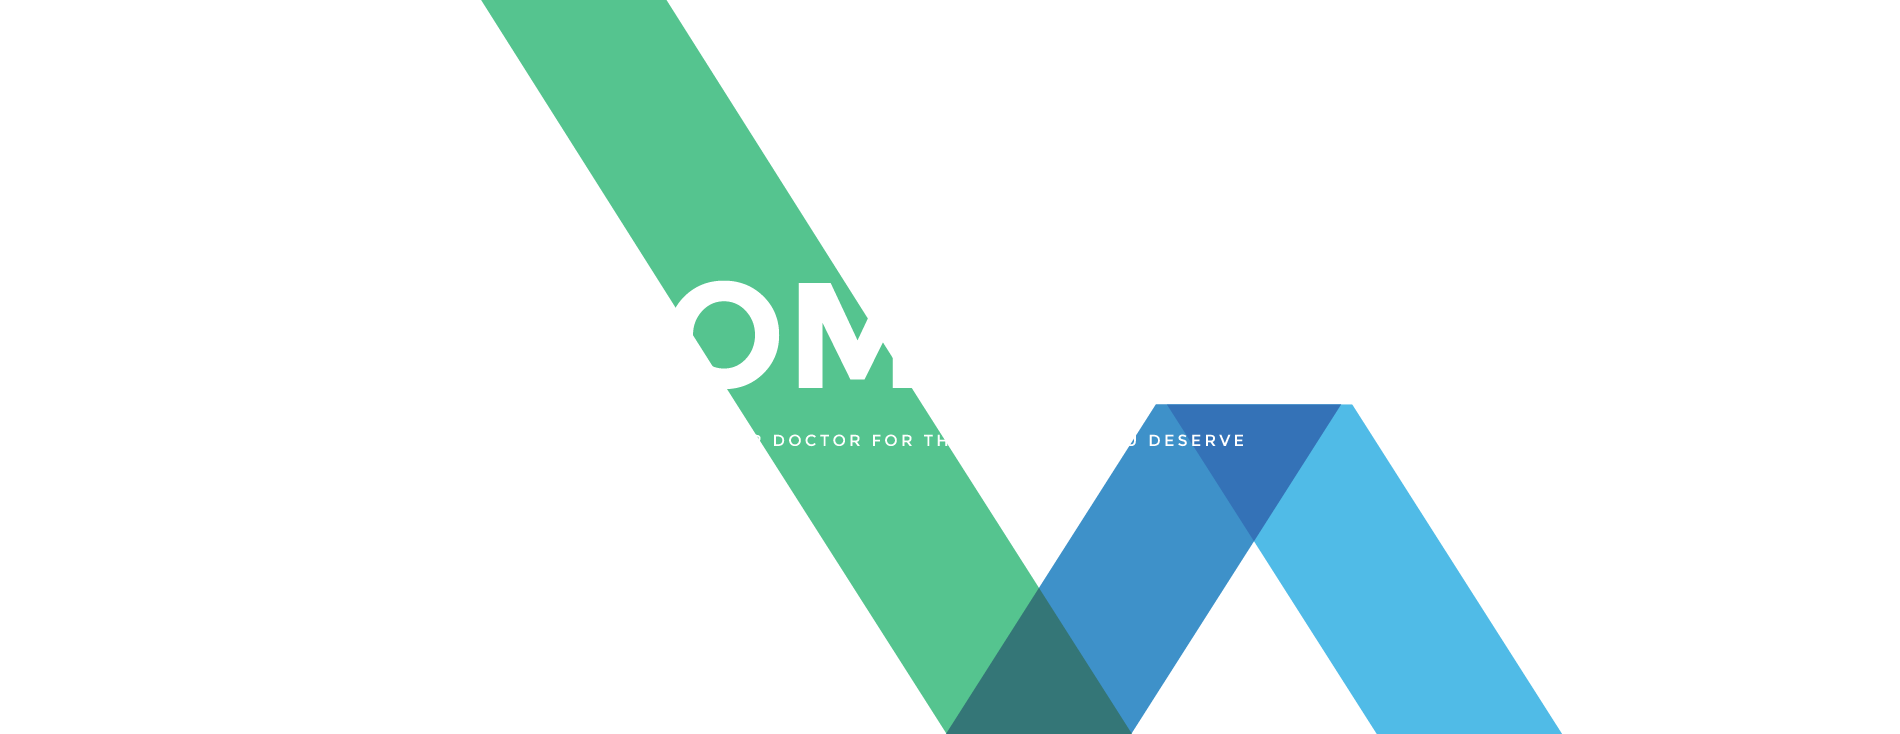 COMFORT.  ASK YOUR DOCCTOR FOR THE COMFORT YOU DESERVE